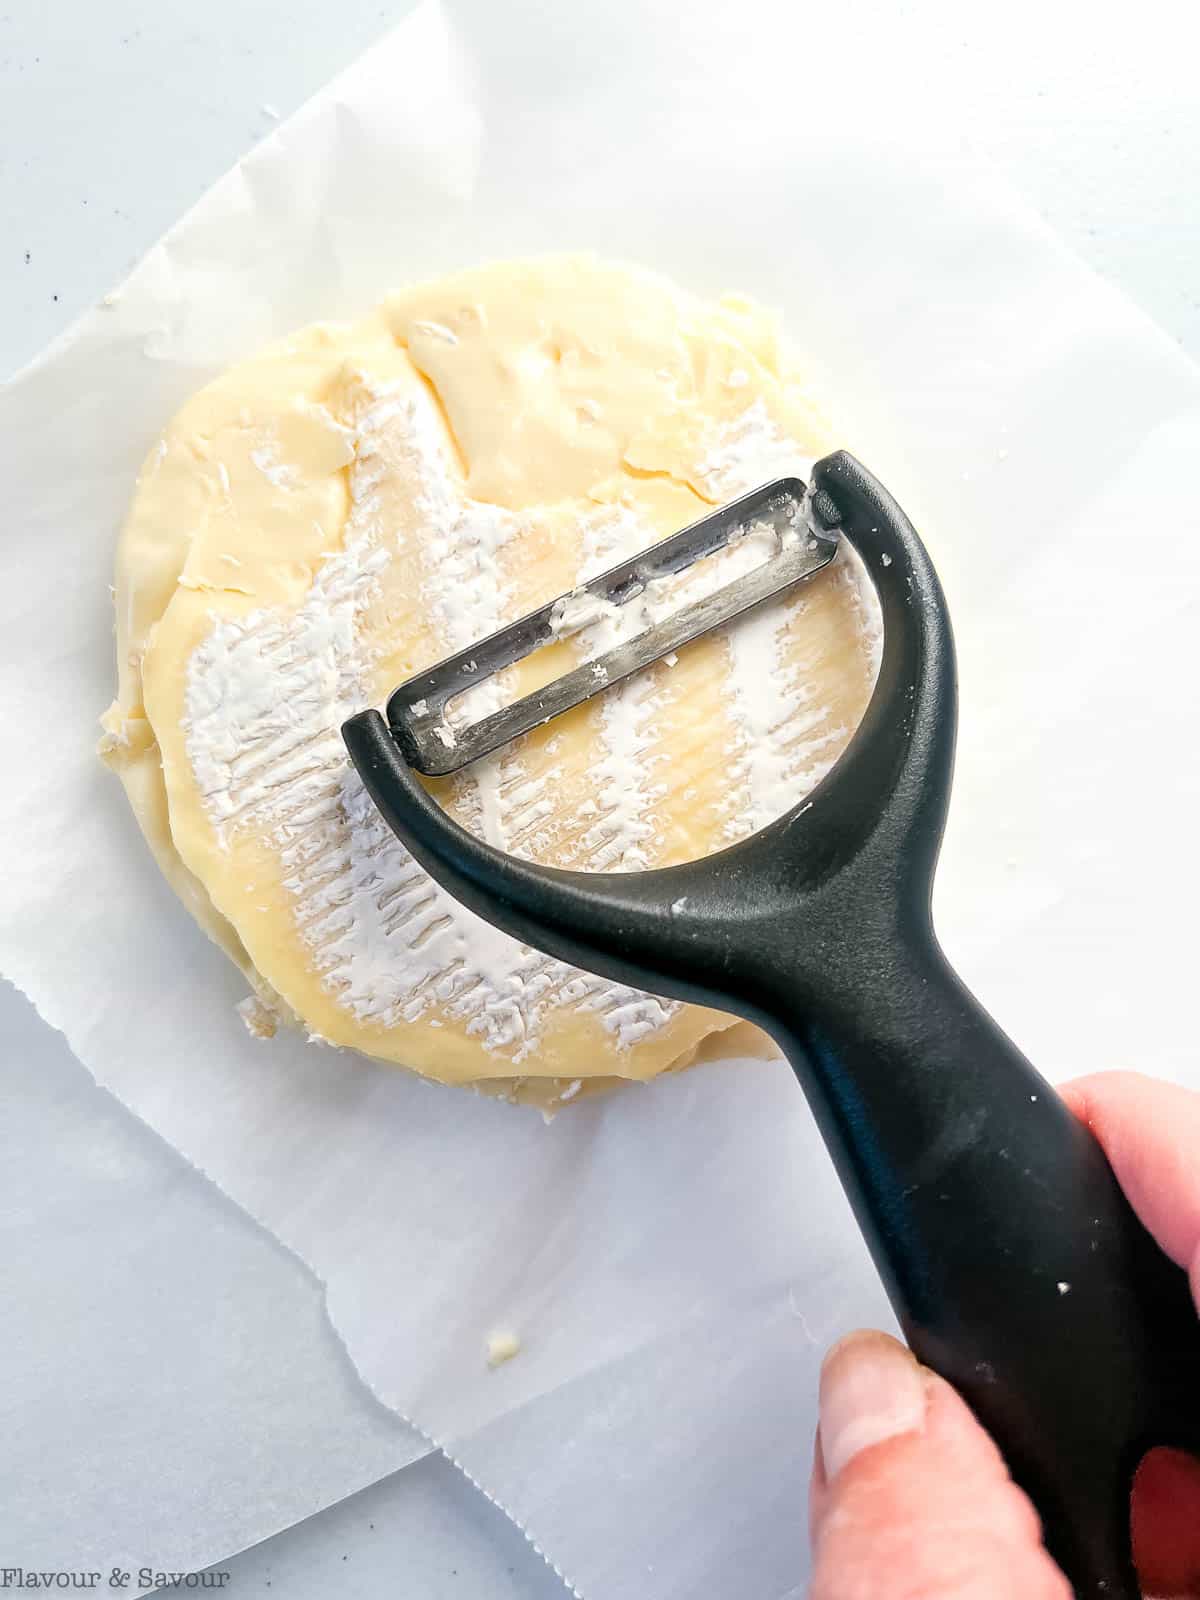 Removing rind from a wheel of Brie with a vegetable peeler.